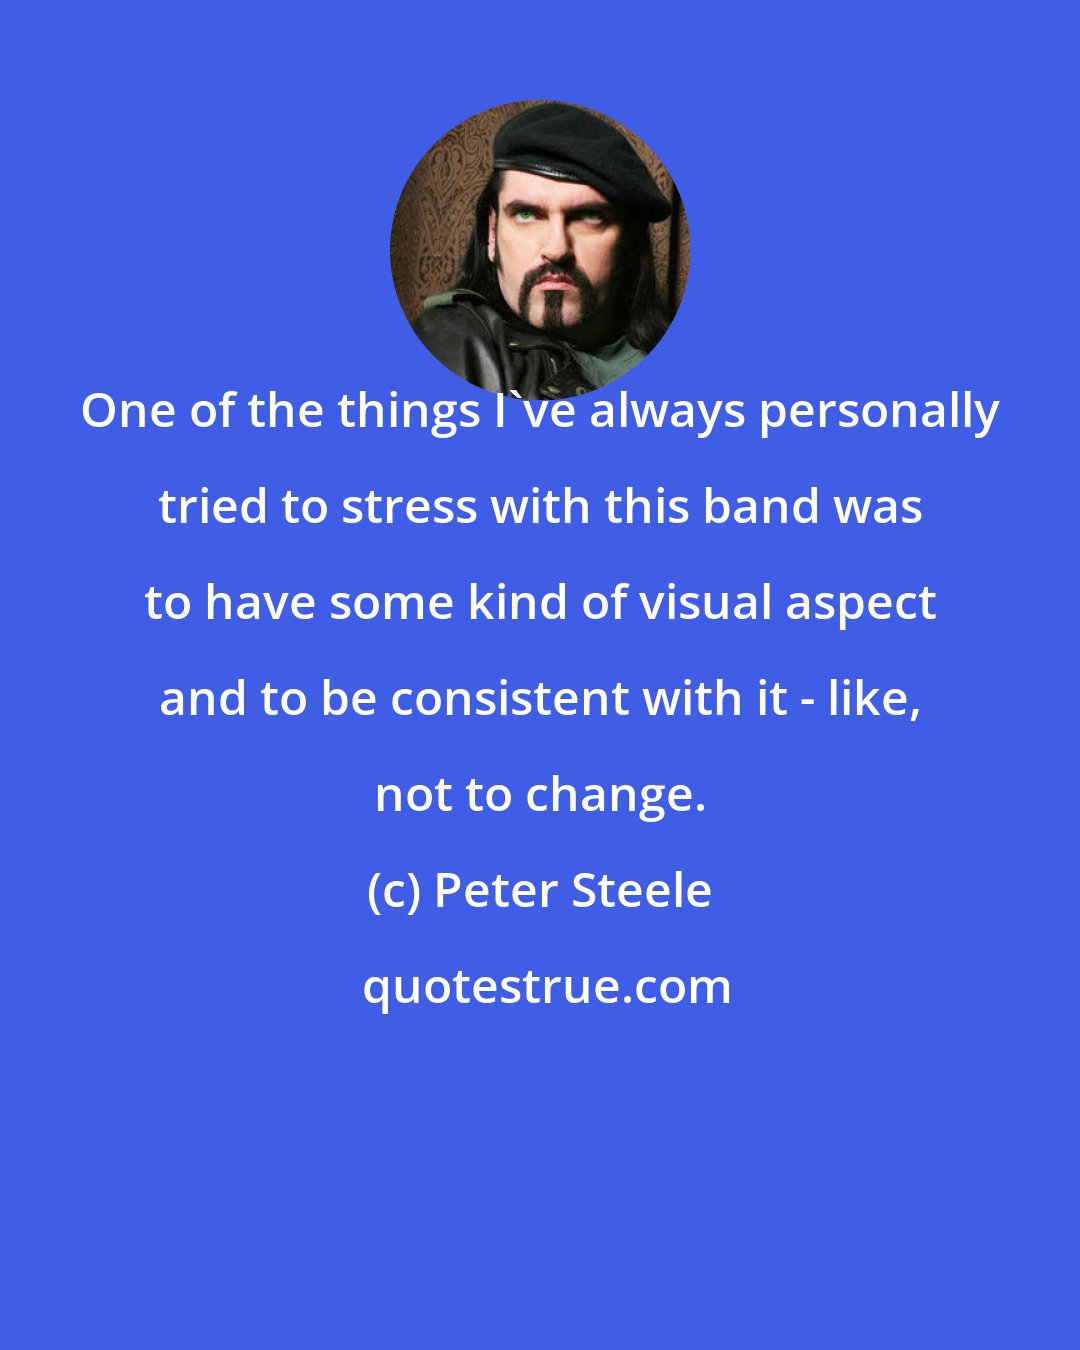 Peter Steele: One of the things I've always personally tried to stress with this band was to have some kind of visual aspect and to be consistent with it - like, not to change.